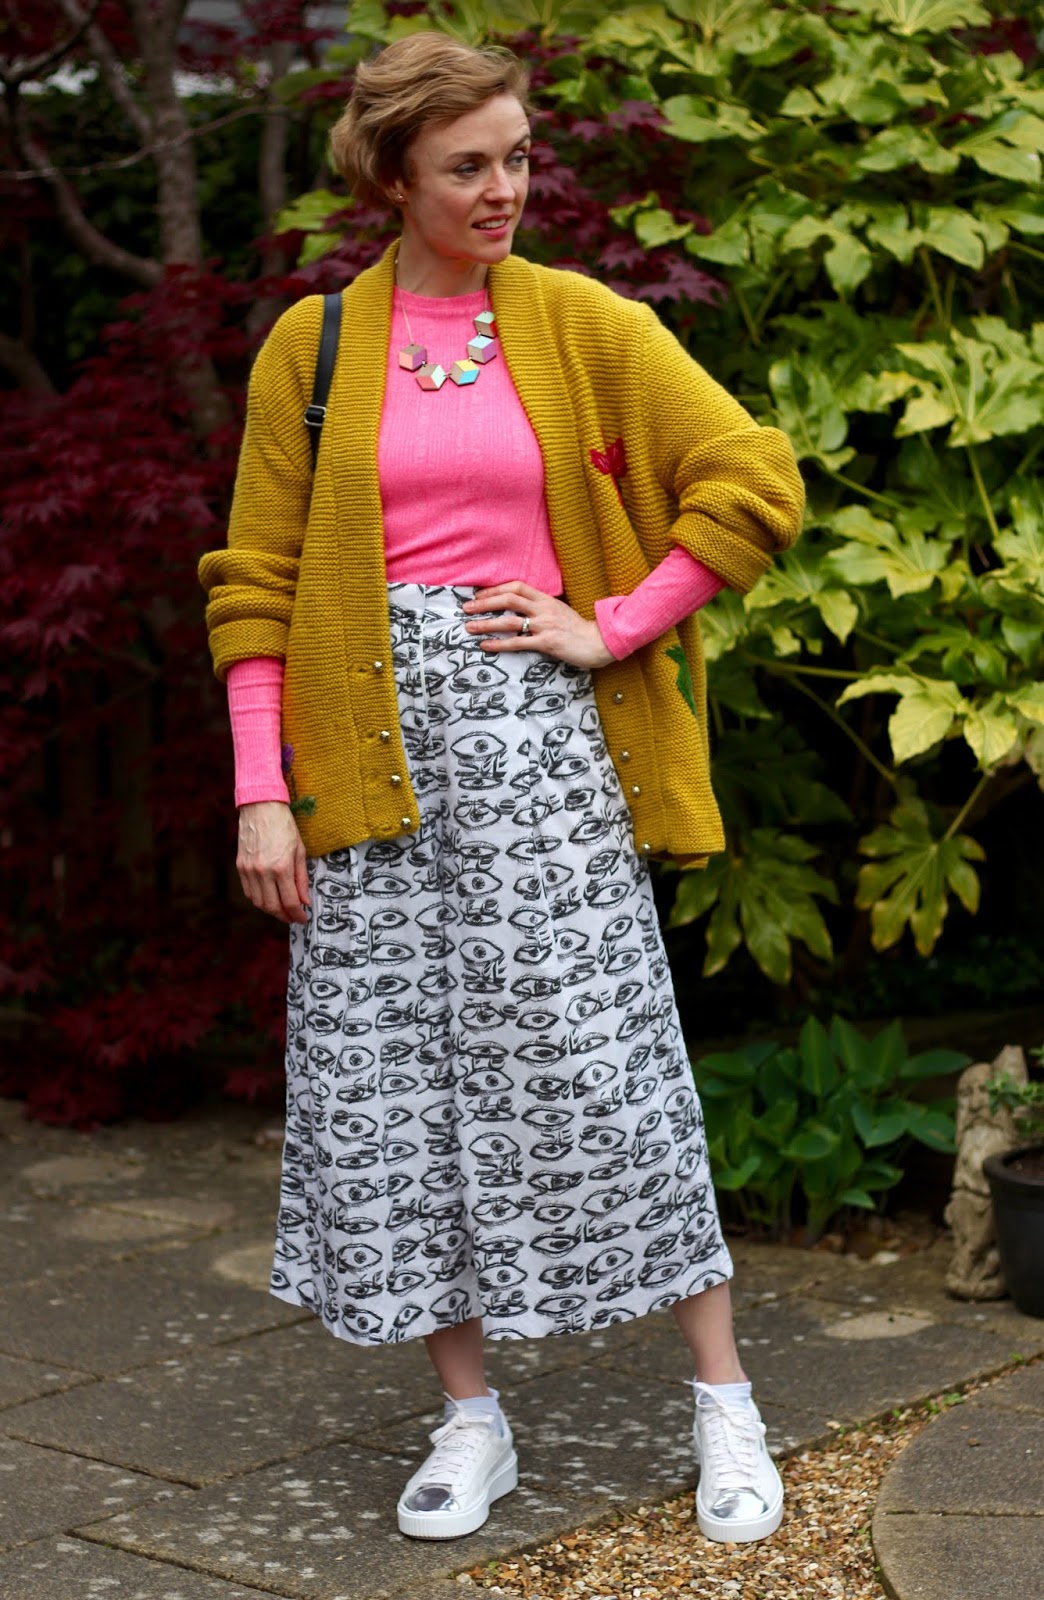 Culottes, white trainers, neon and a statement knit | Fake Fabulous